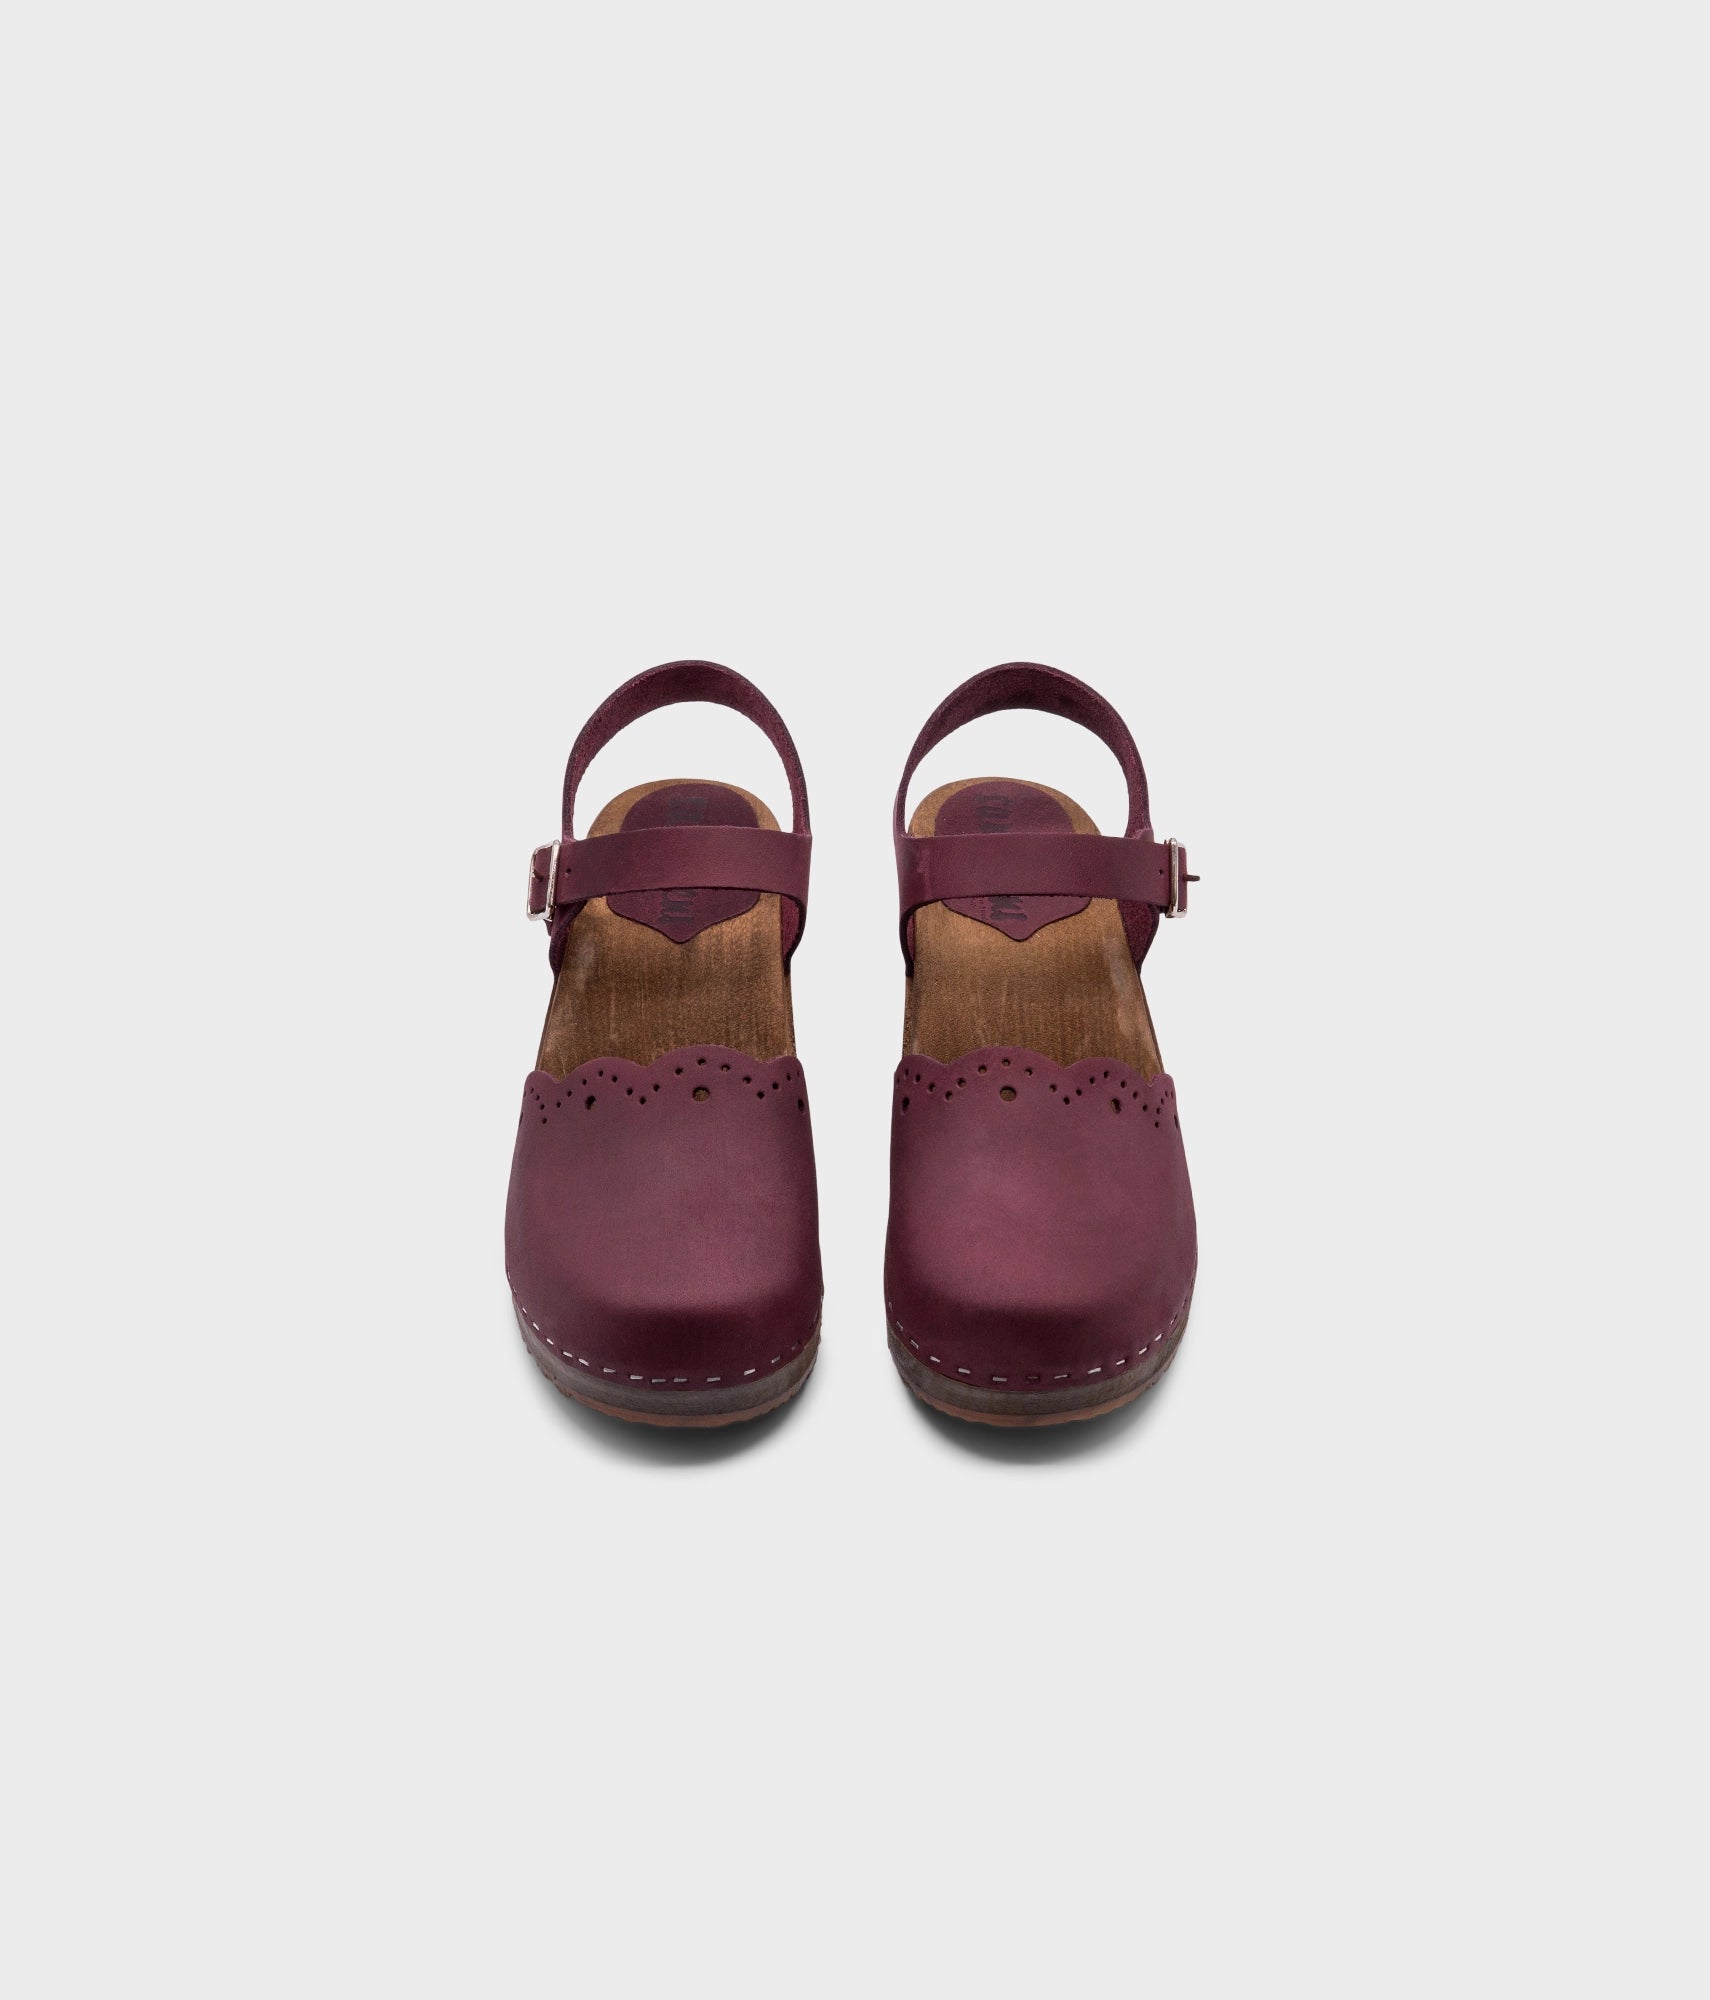 low heeled closed-toe clog sandals in plum purple nubuck leather with a wavy leather cutout stapled on a dark wooden base